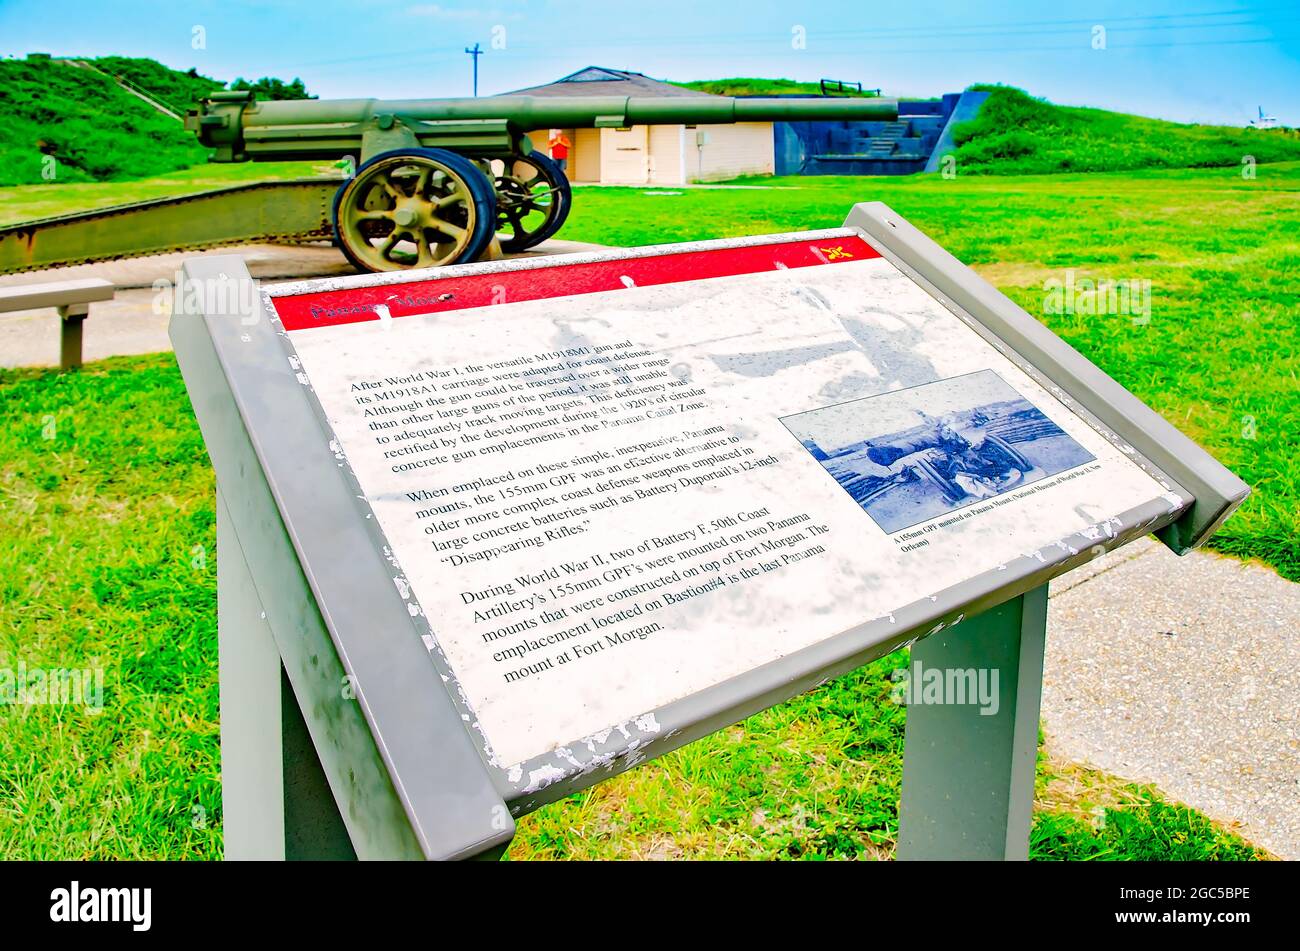 An M1918M1 cannon with a Panama mount is displayed at Fort Morgan, July 31, 2021, in Gulf Shores, Alabama. Stock Photo